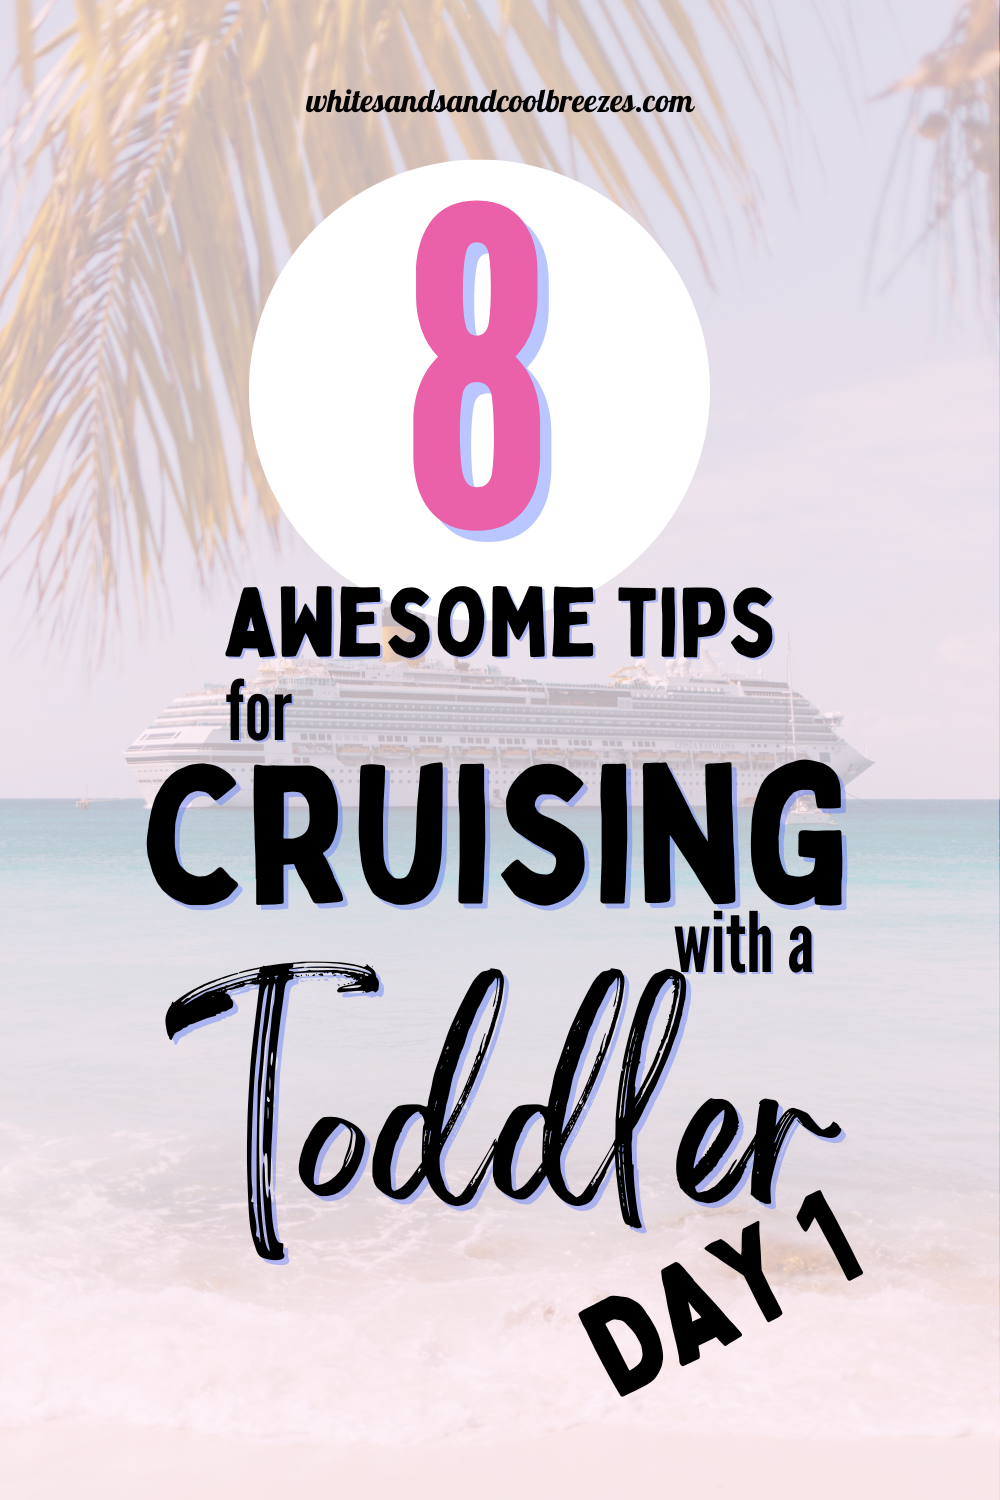 8 Of The Best Tips For Cruising With A Toddler Series - Day 1